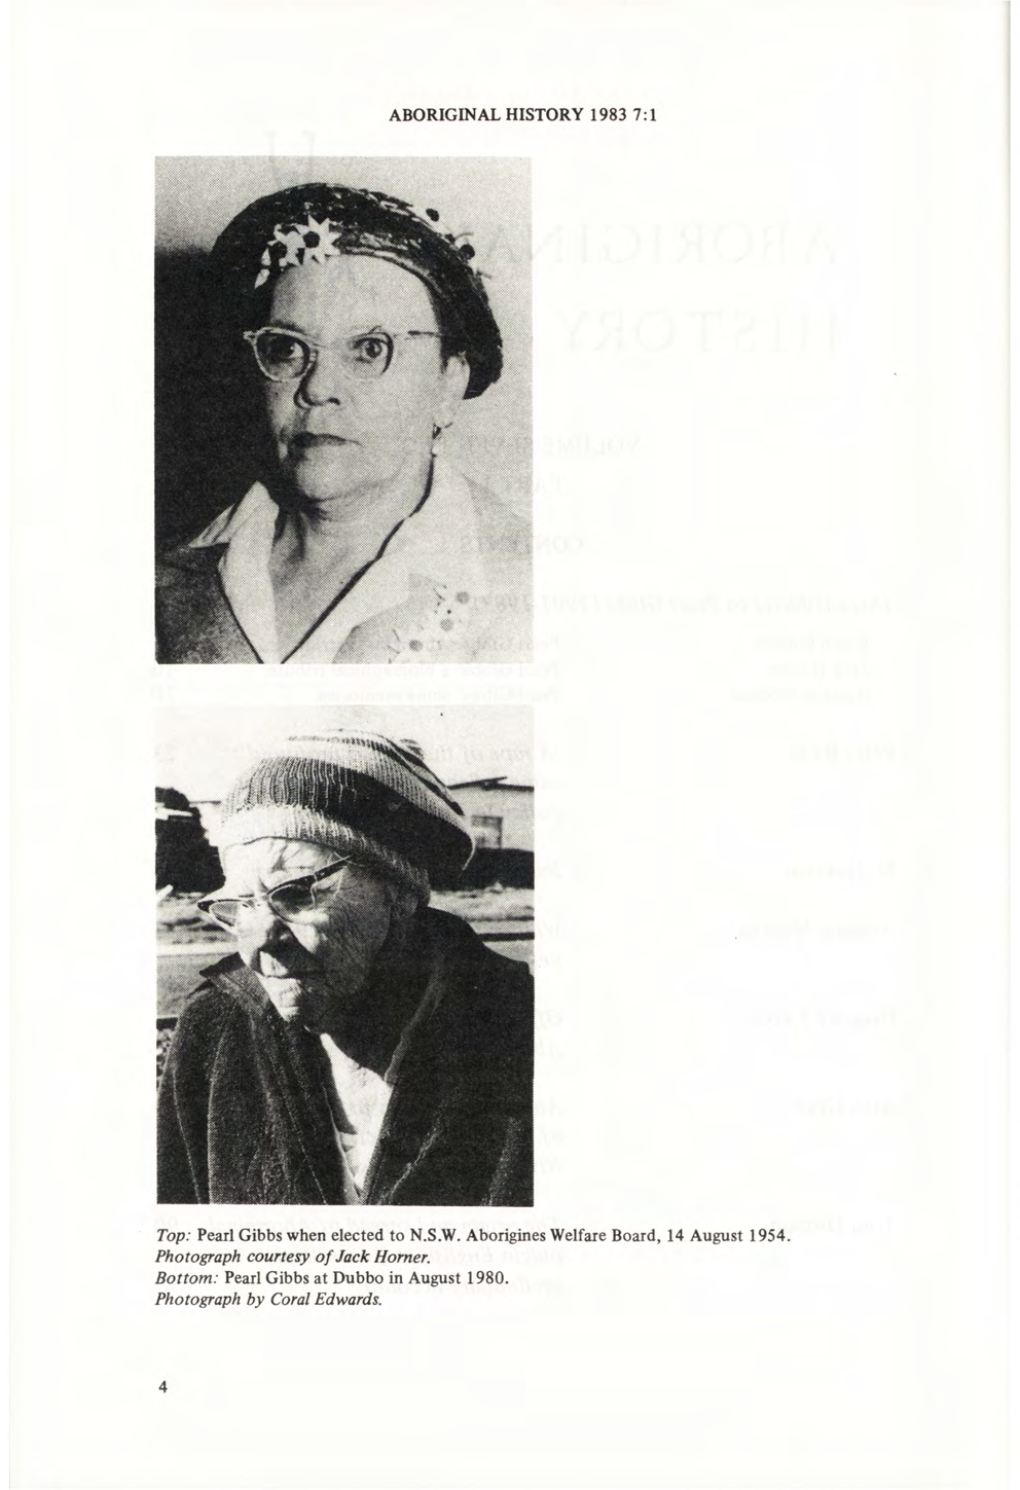 ABORIGINAL HISTORY 1983 7:1 Top: Pearl Gibbs When Elected To